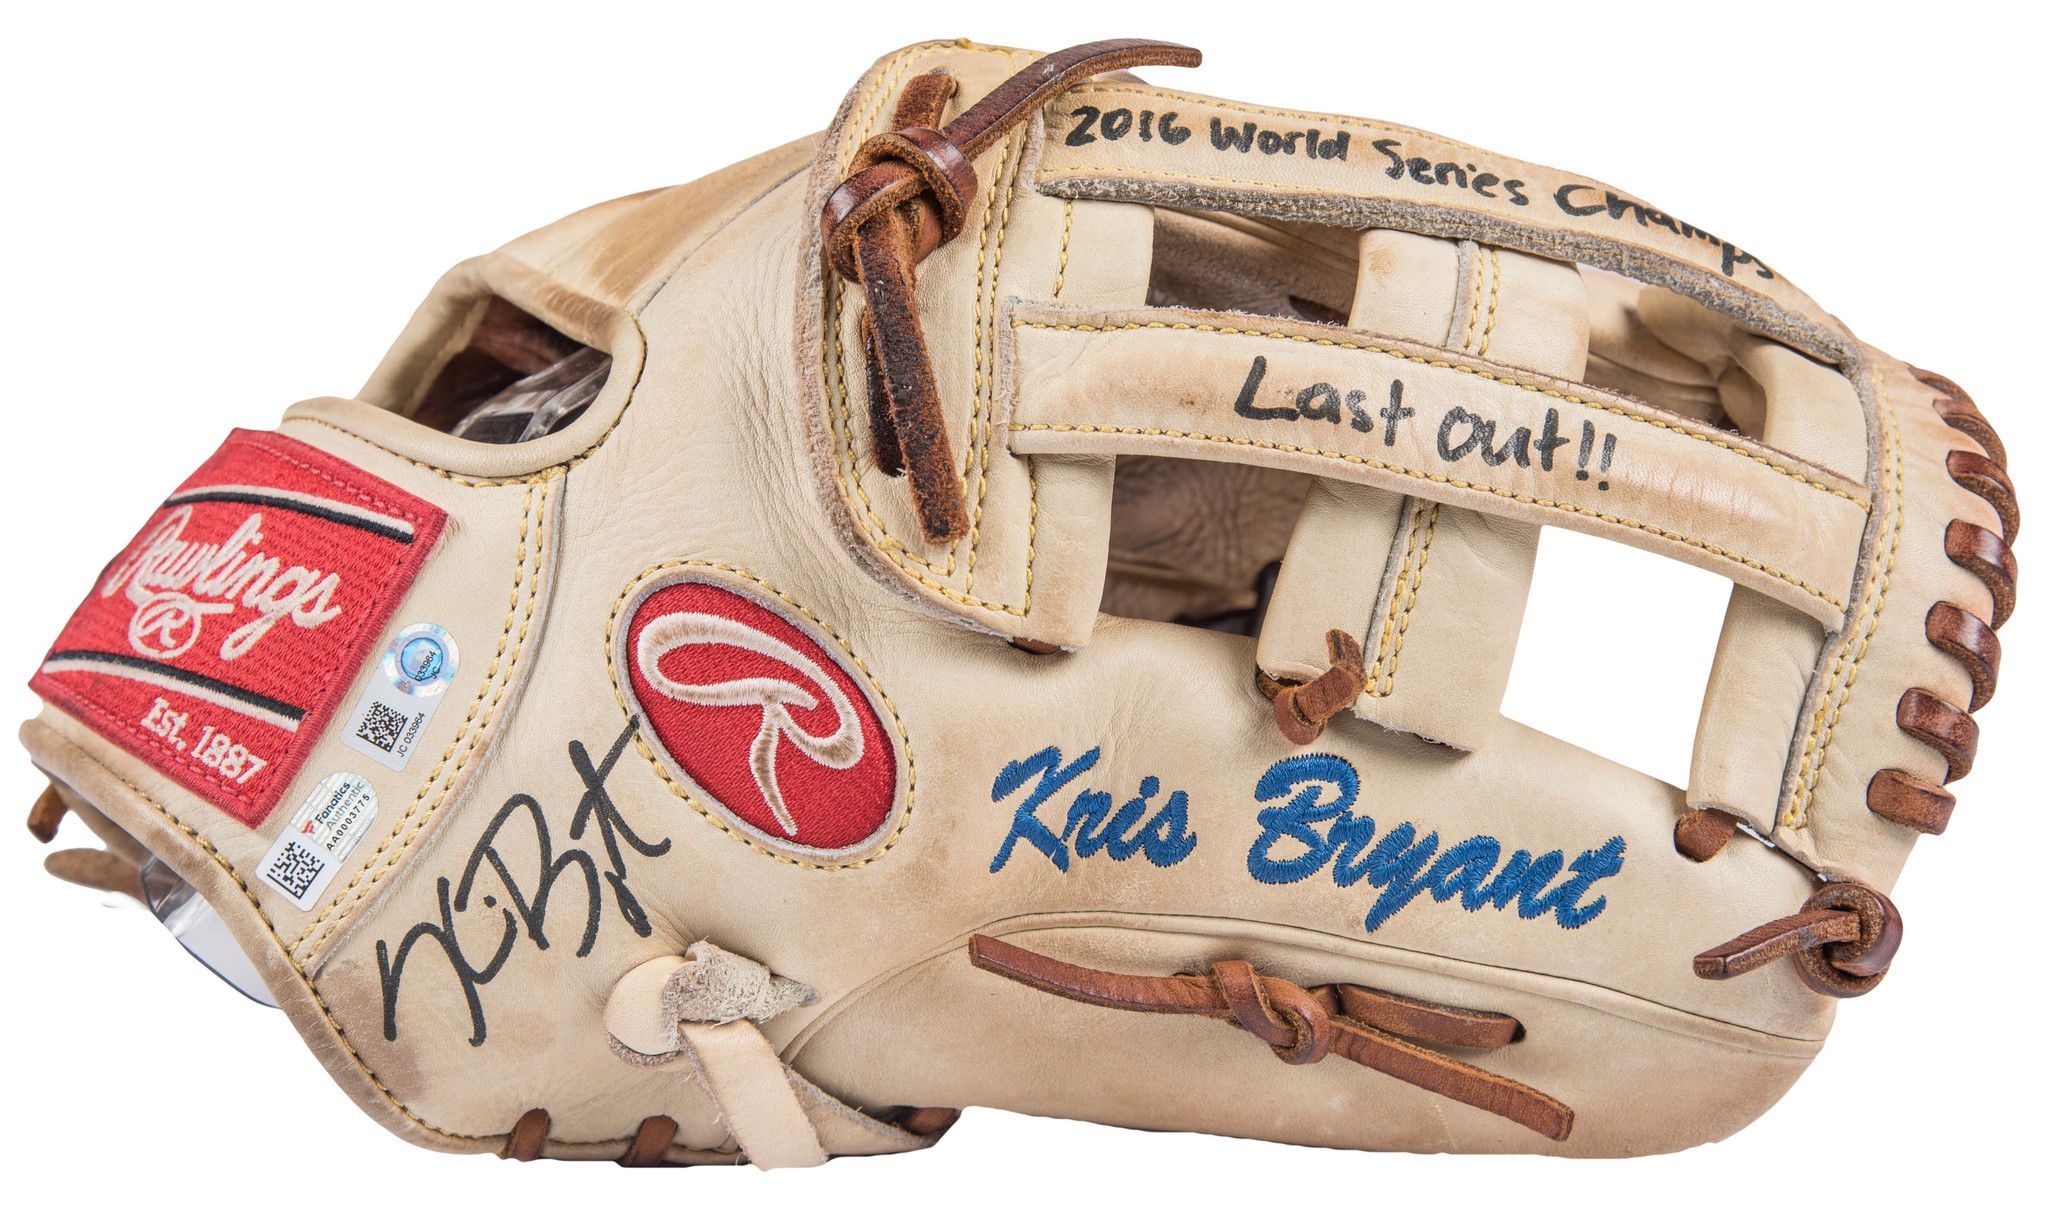 Kris Bryant's and Anthony Rizzo's 'last out' gloves from 2016